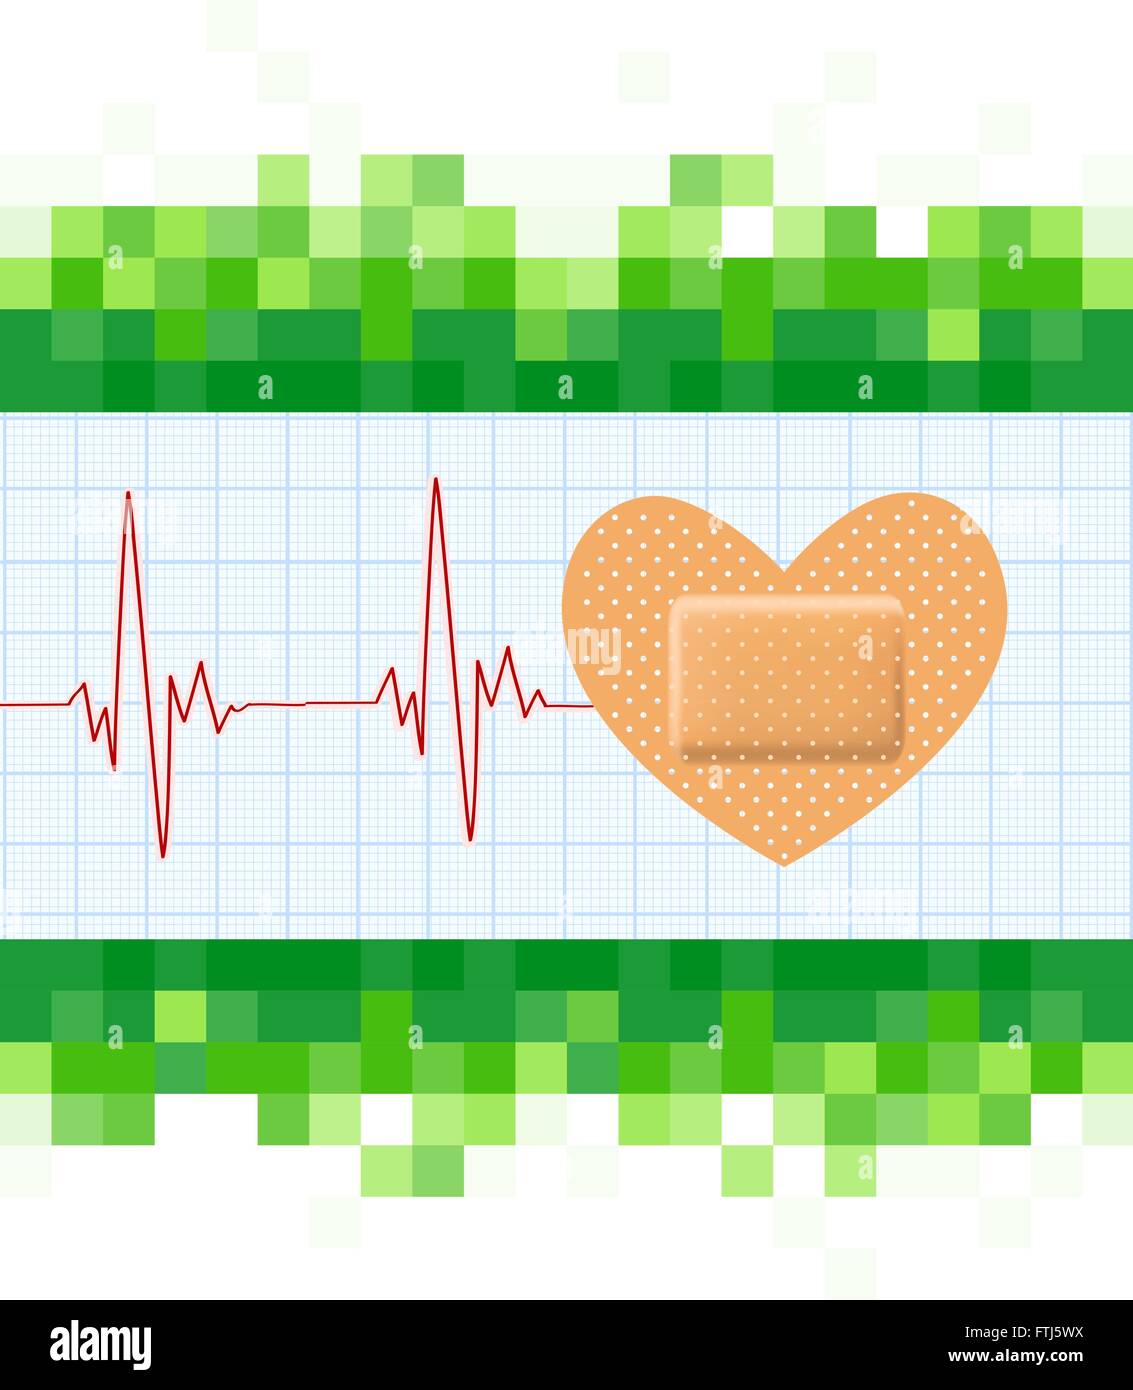 Heart shape medical plaster and cardiogram on mosaic green background. Conceptual healthcare illustration with heart adhesive ba Stock Vector